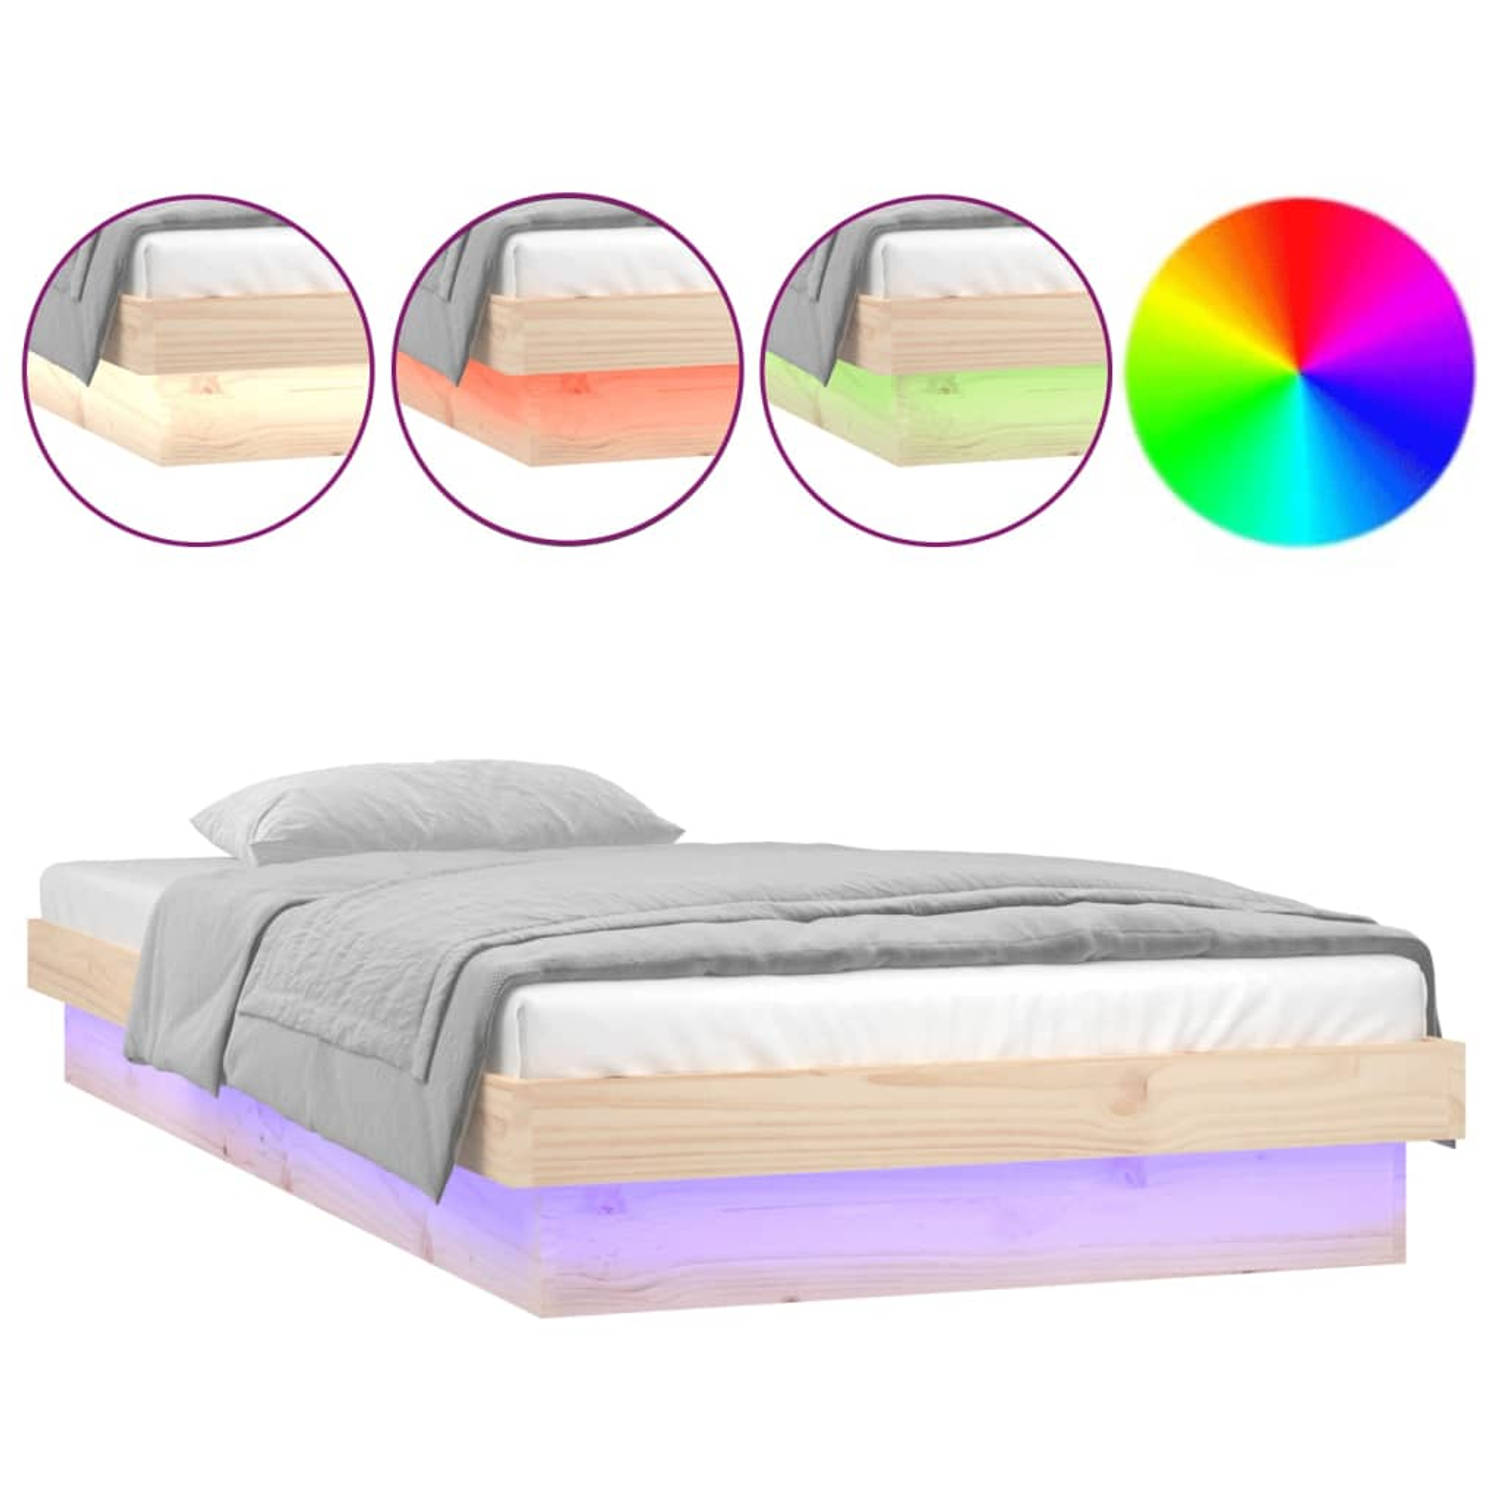 The Living Store Bedframe LED massief hout 100x200 cm - Bedframe - Bedframes - Eenpersoonsbed - Bed - Bedombouw - Ledikant - Houten Bedframe - Eenpersoonsbedden - Bedden - Bedombou